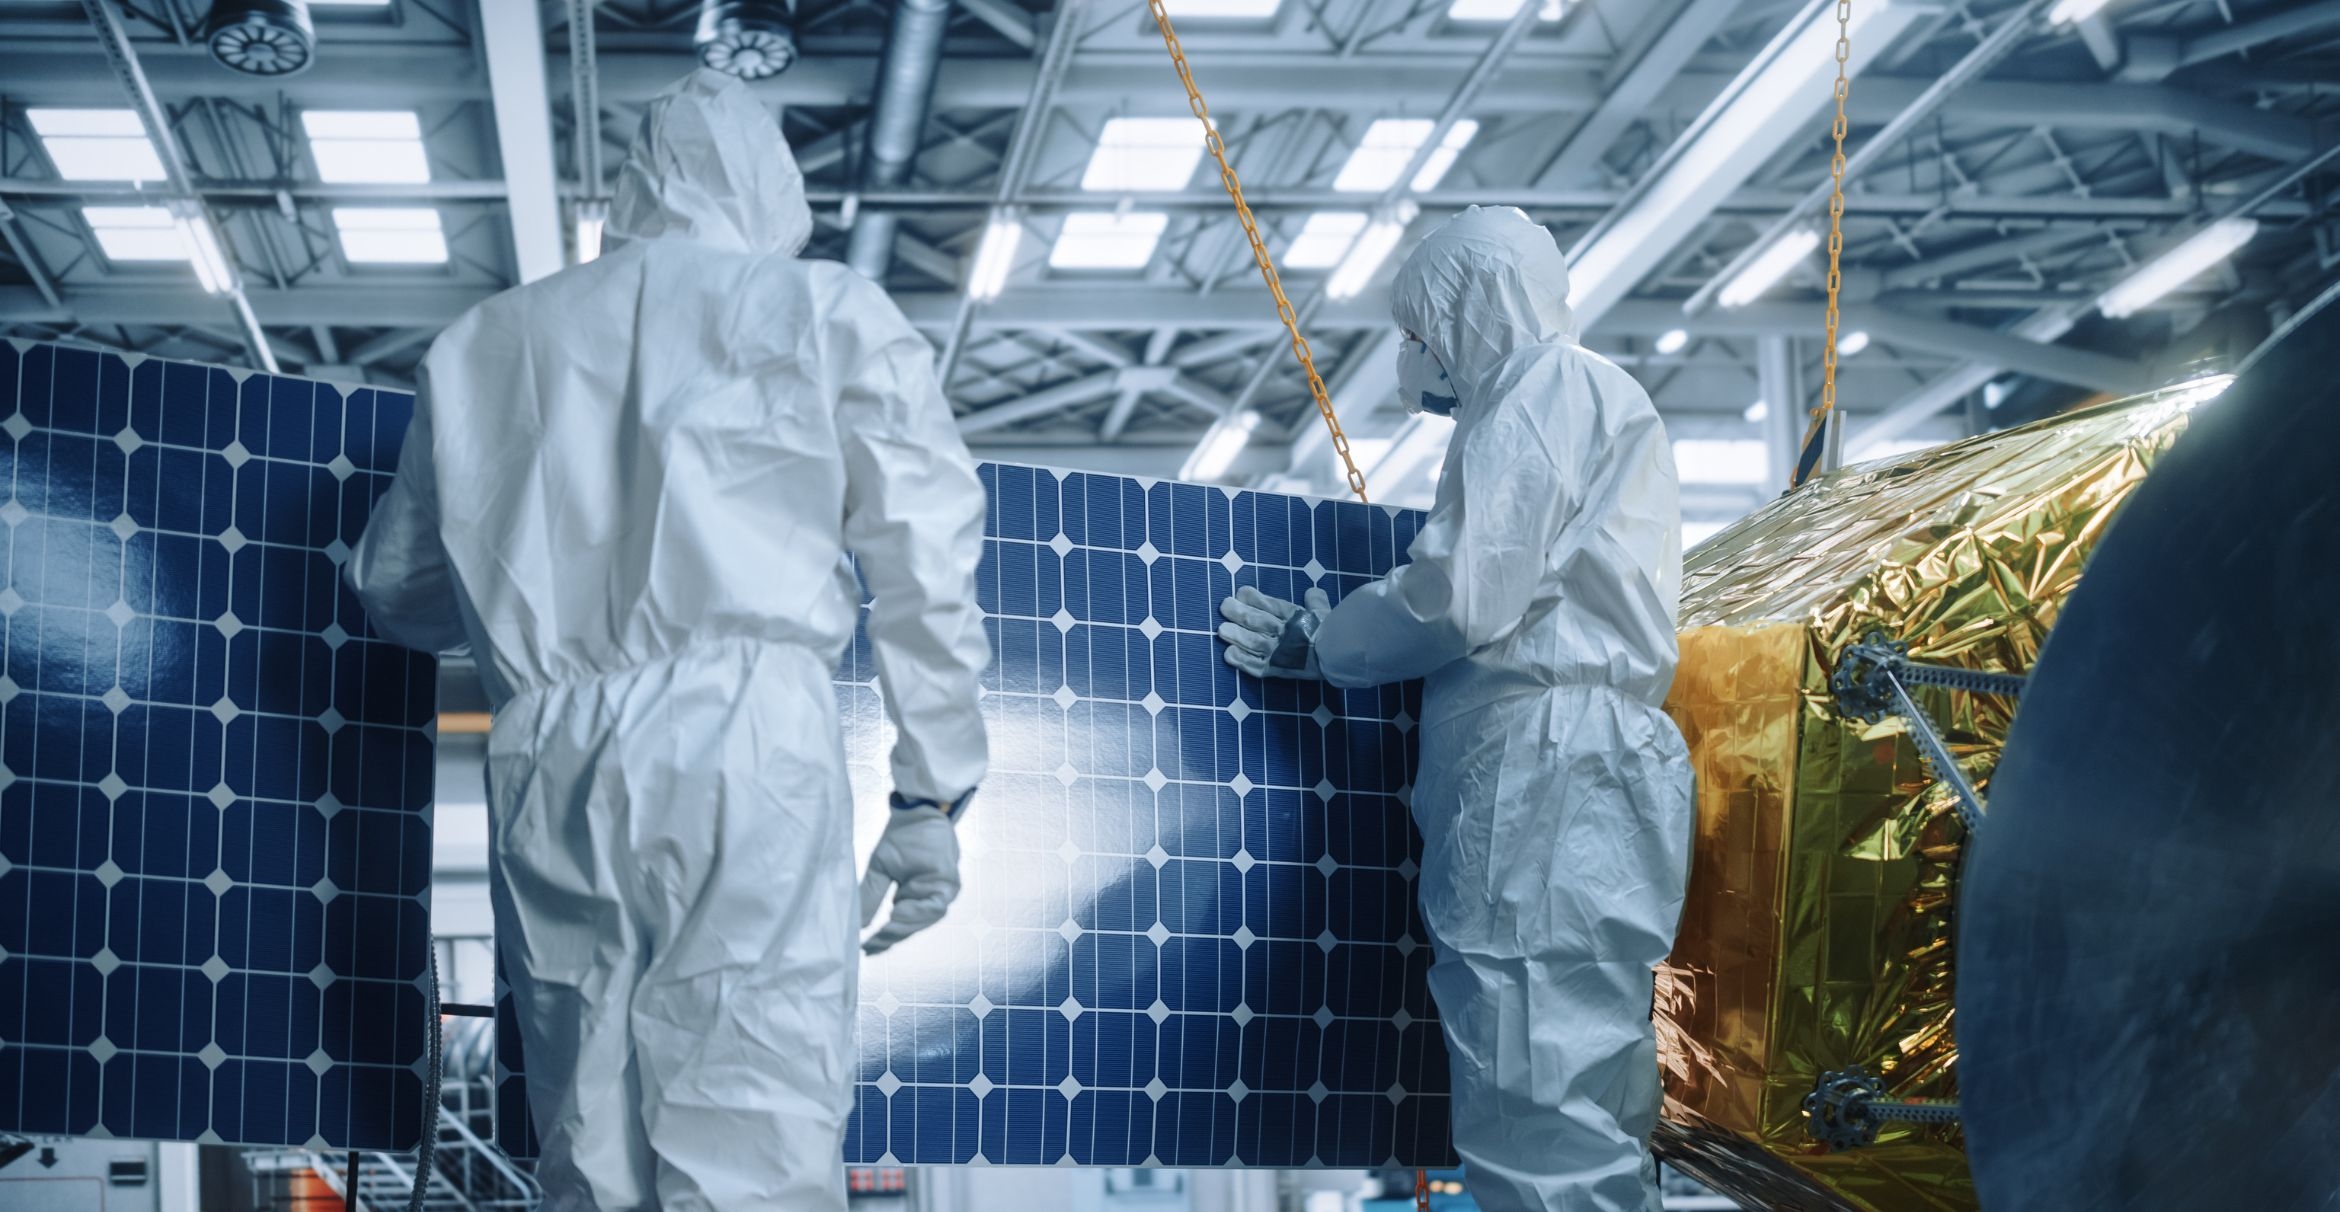 photo of solar cells in the backgroud and two people wearing hazmat suits with face masks in the foreground